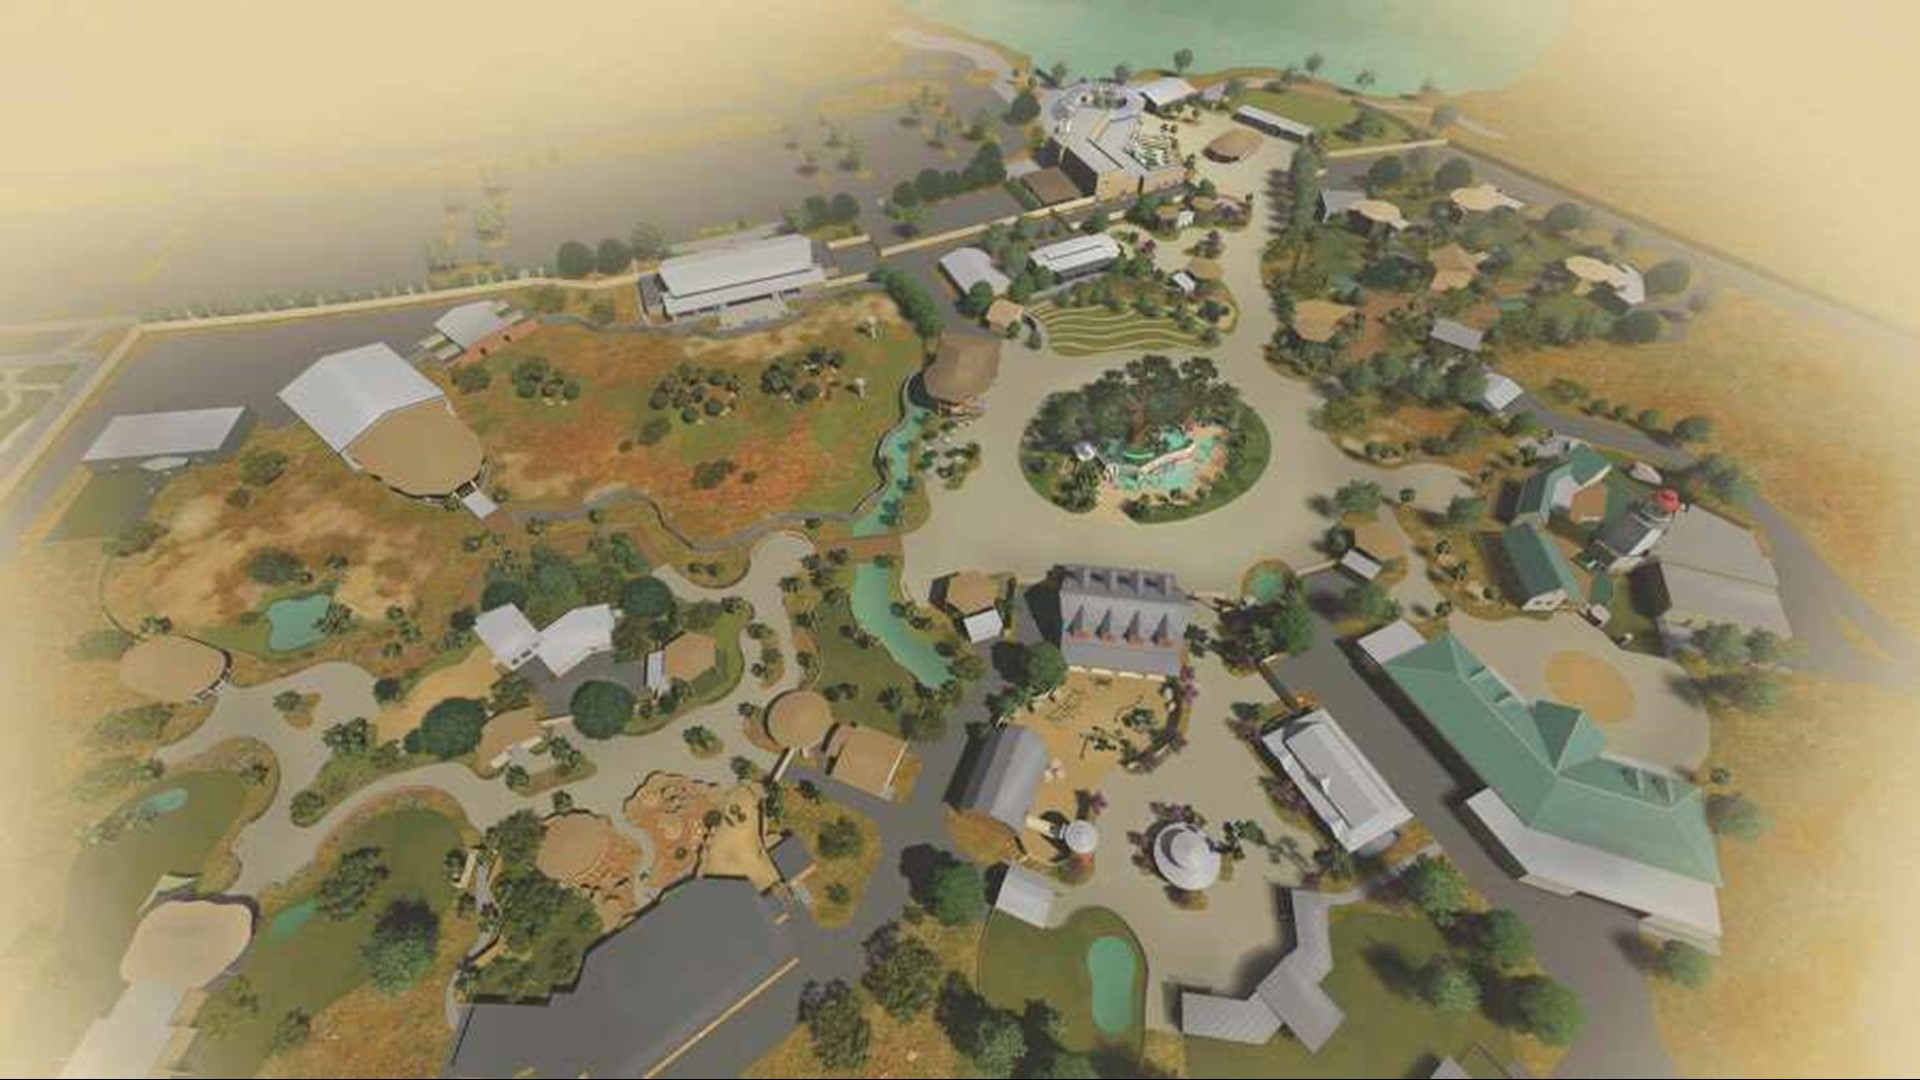 The zoo project received a unanimous yes from the Midland Planning & Zoning Commission for a four-acre Wildlife Rehabilitation Center for multi-purpose use.